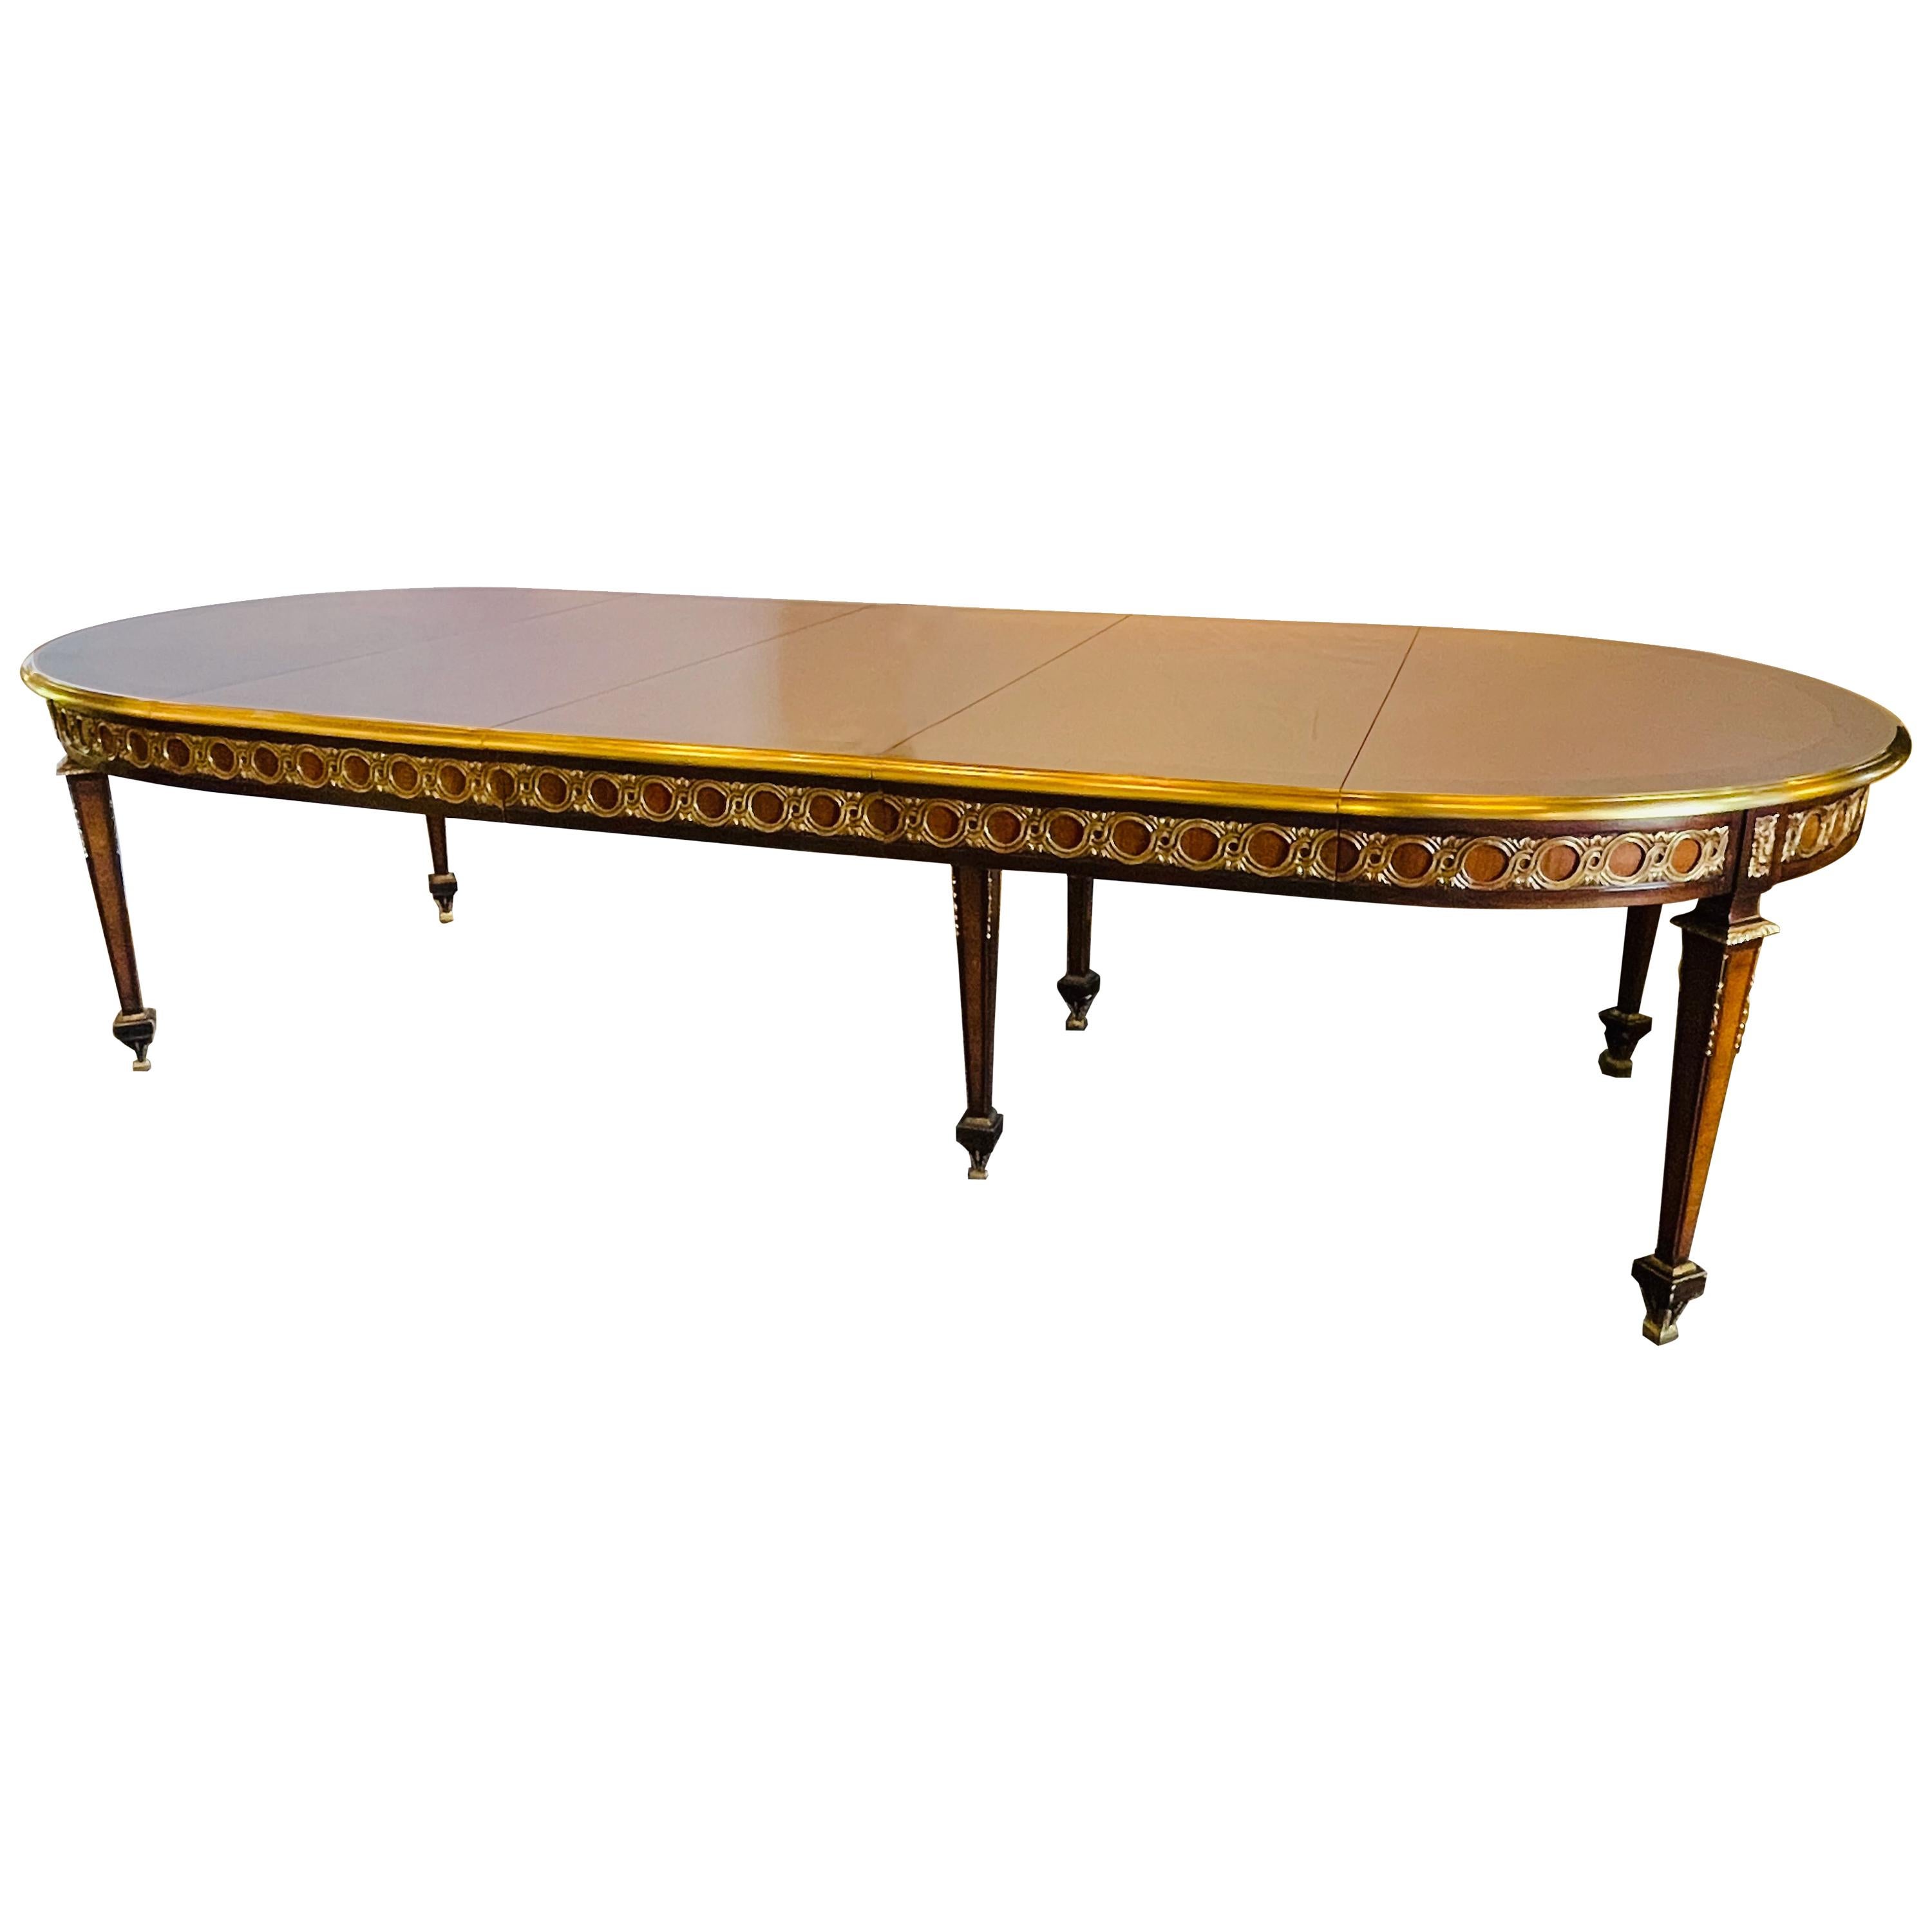 French Louis XVi Style Circular Oval Dining-room Table with Three Leaves